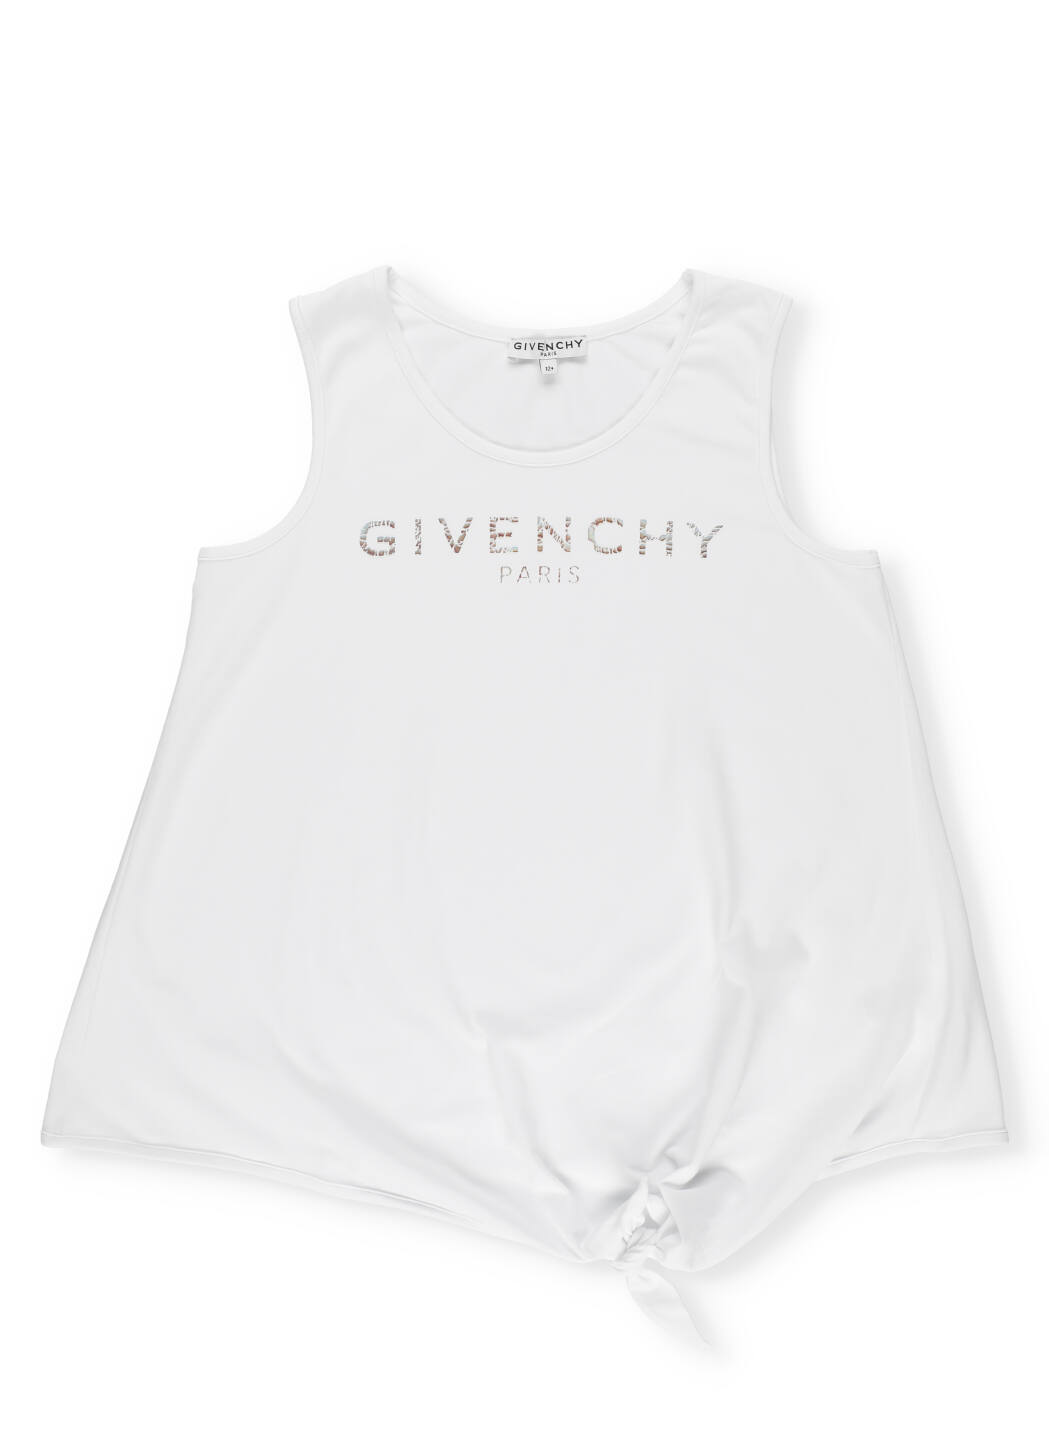 Givenchy Stretch Cotton Top